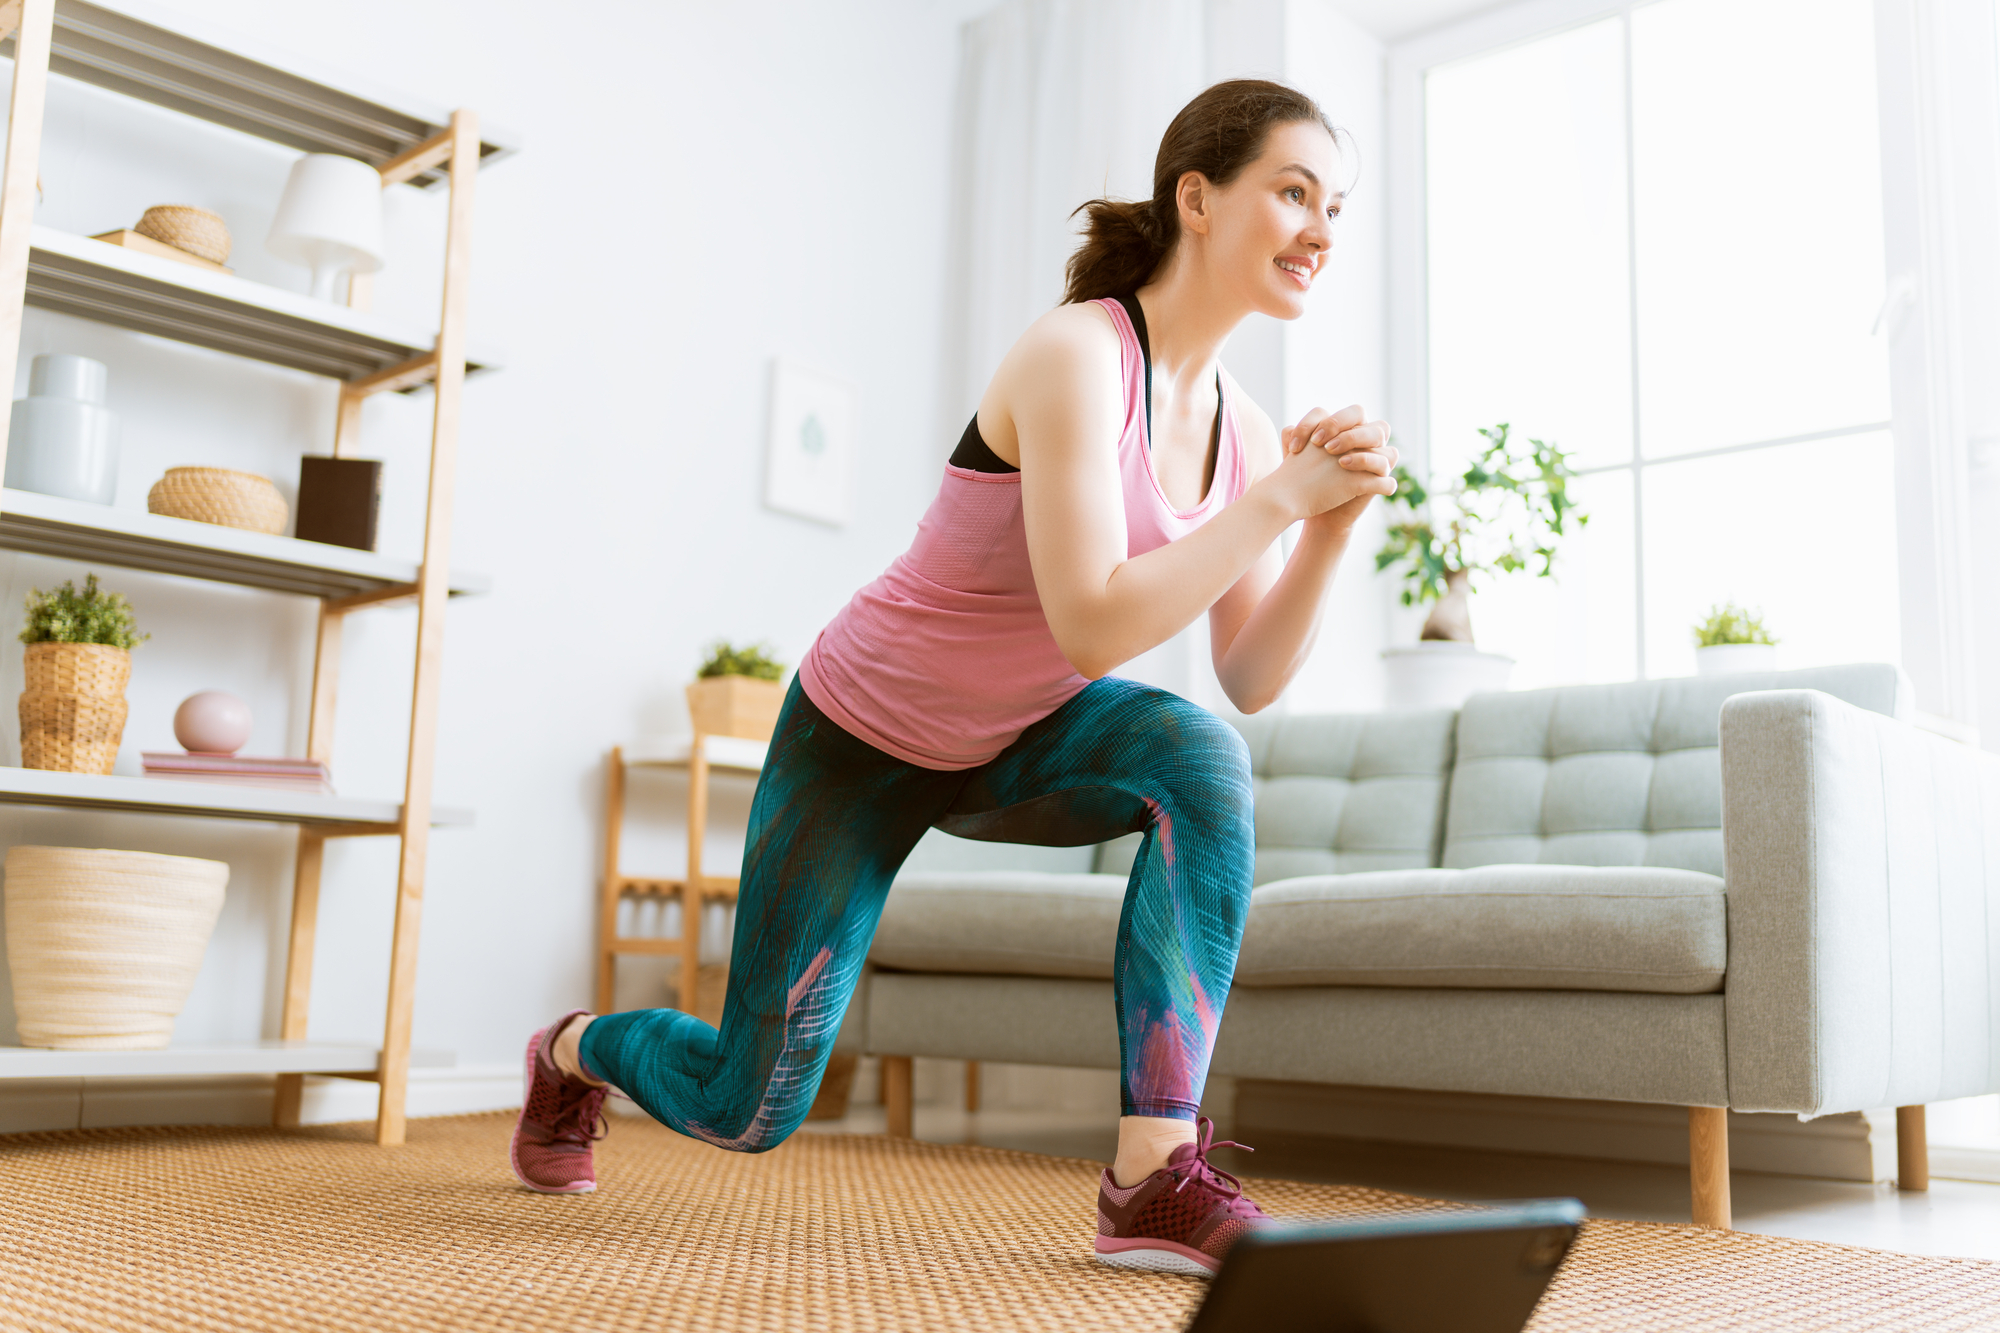 A woman in exercise clothes does lunges in a bright living room with a laptop in front of her. She is wearing a pink tank top and colorful leggings. The room has a sofa, wire shelf with decorative items, and a large window letting in natural light.